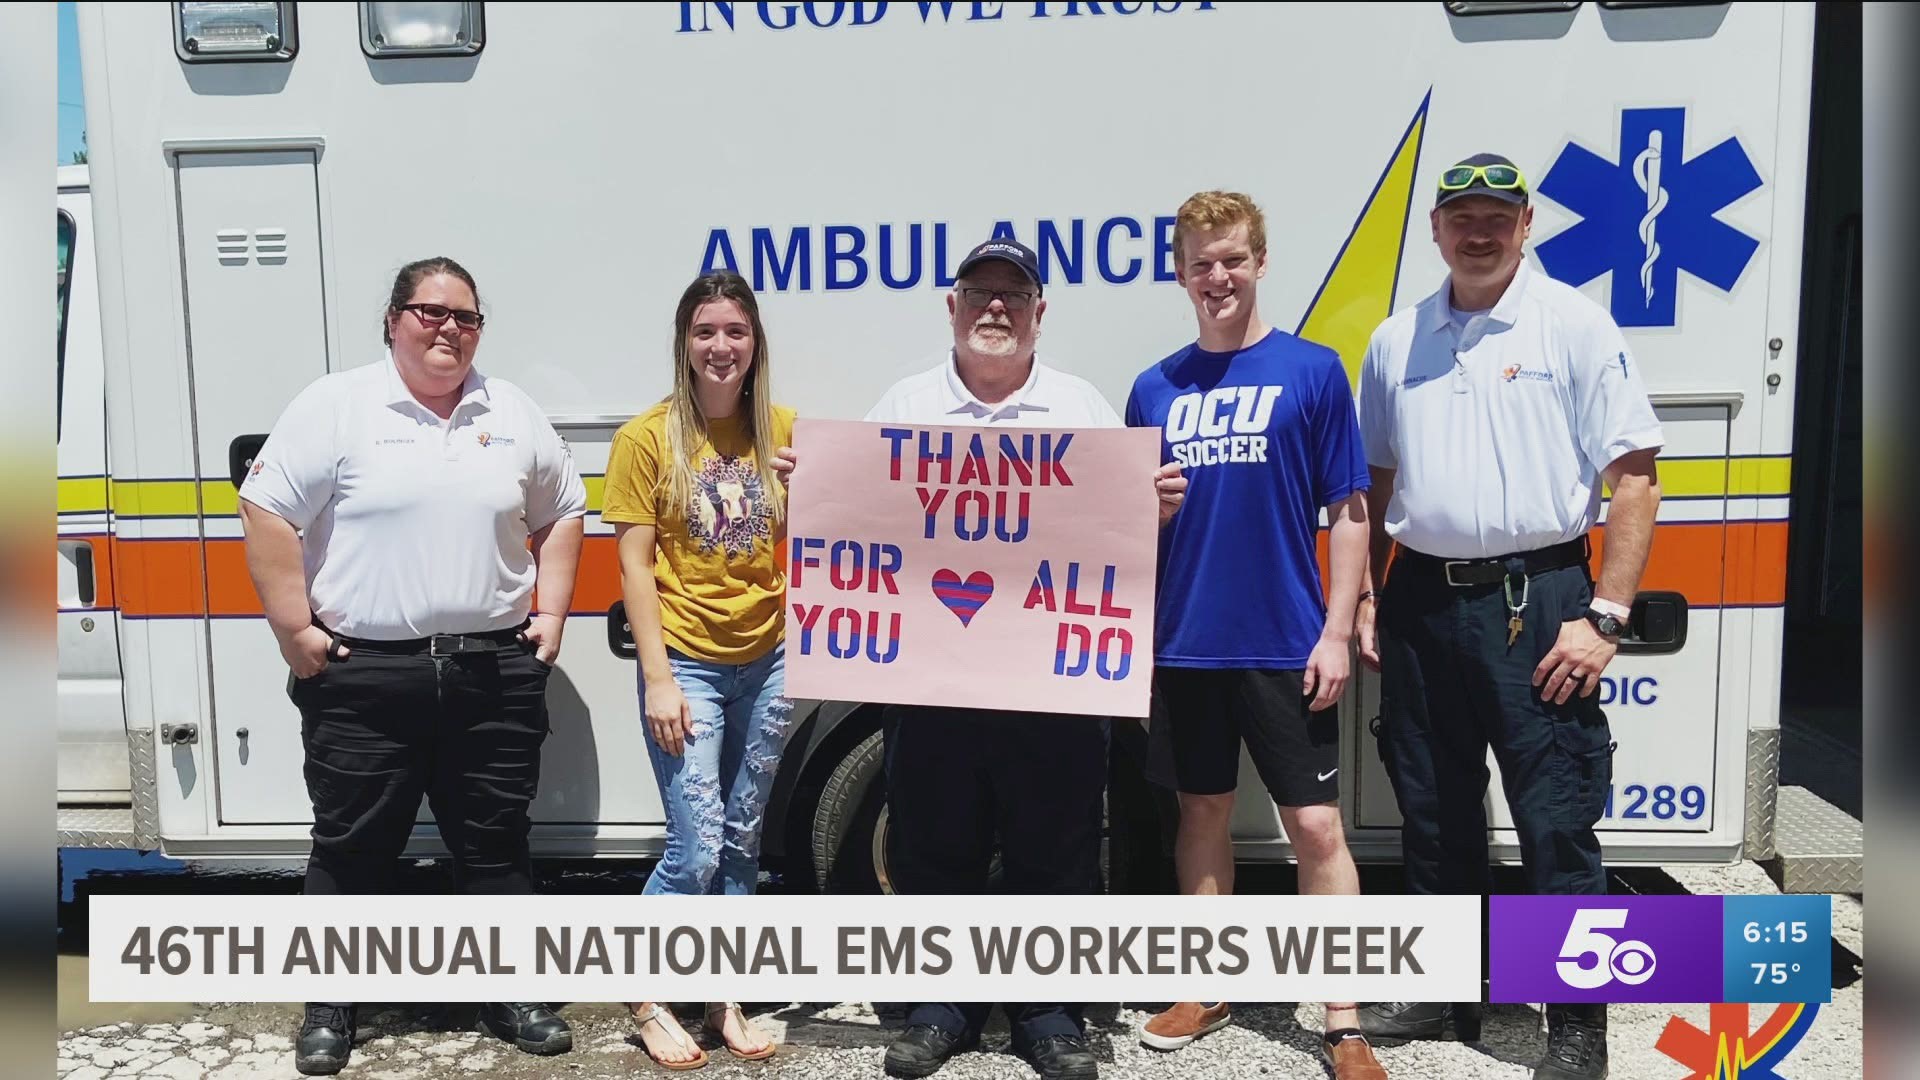 It's National EMS Week, and many communities are finding ways to honor their emergency medical service (EMS) workers during the coronavirus (COVID-19) pandemic.